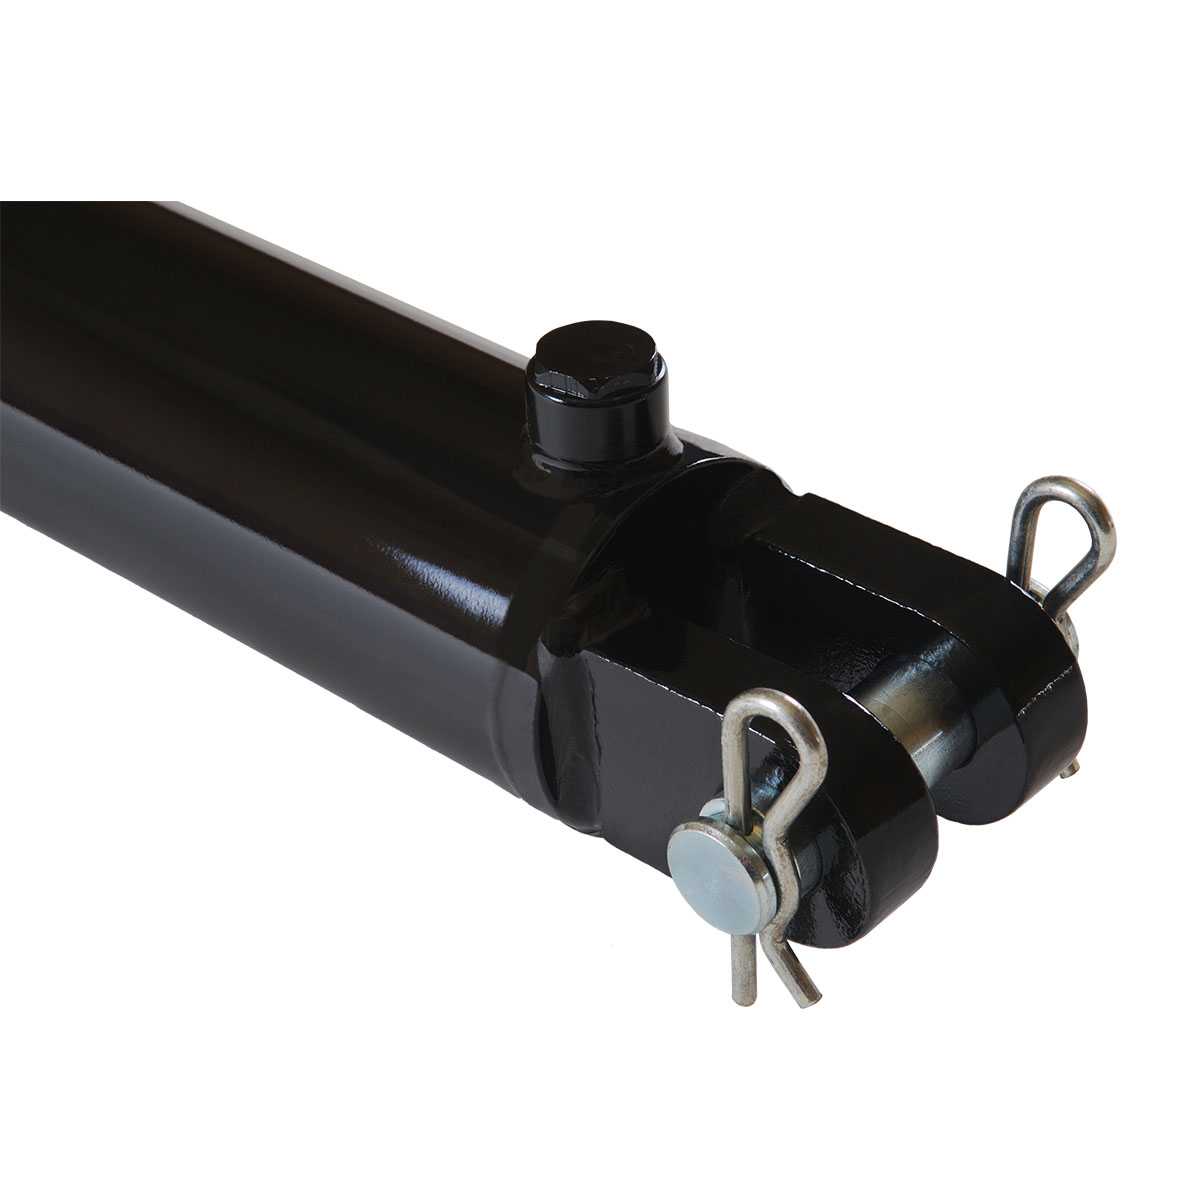 3 bore x 12 stroke hydraulic cylinder, welded clevis double acting cylinder | Magister Hydraulics